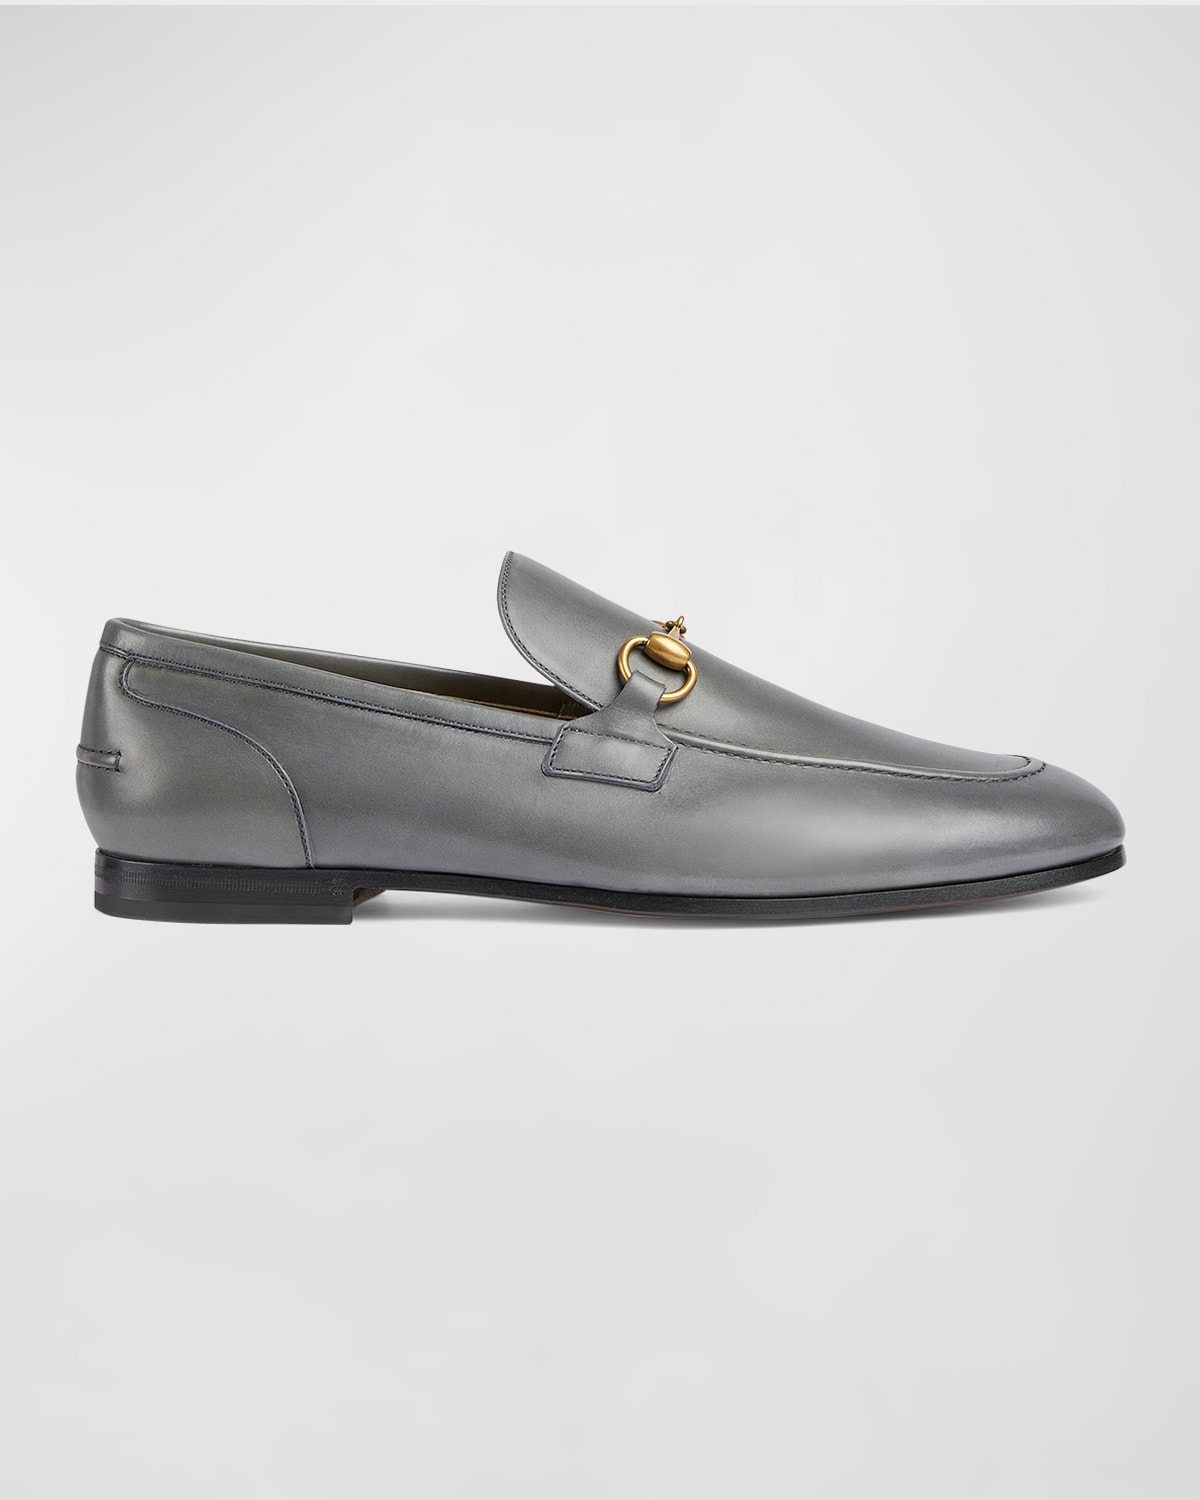 GUCCI MEN'S JORDAAN LEATHER LOAFERS